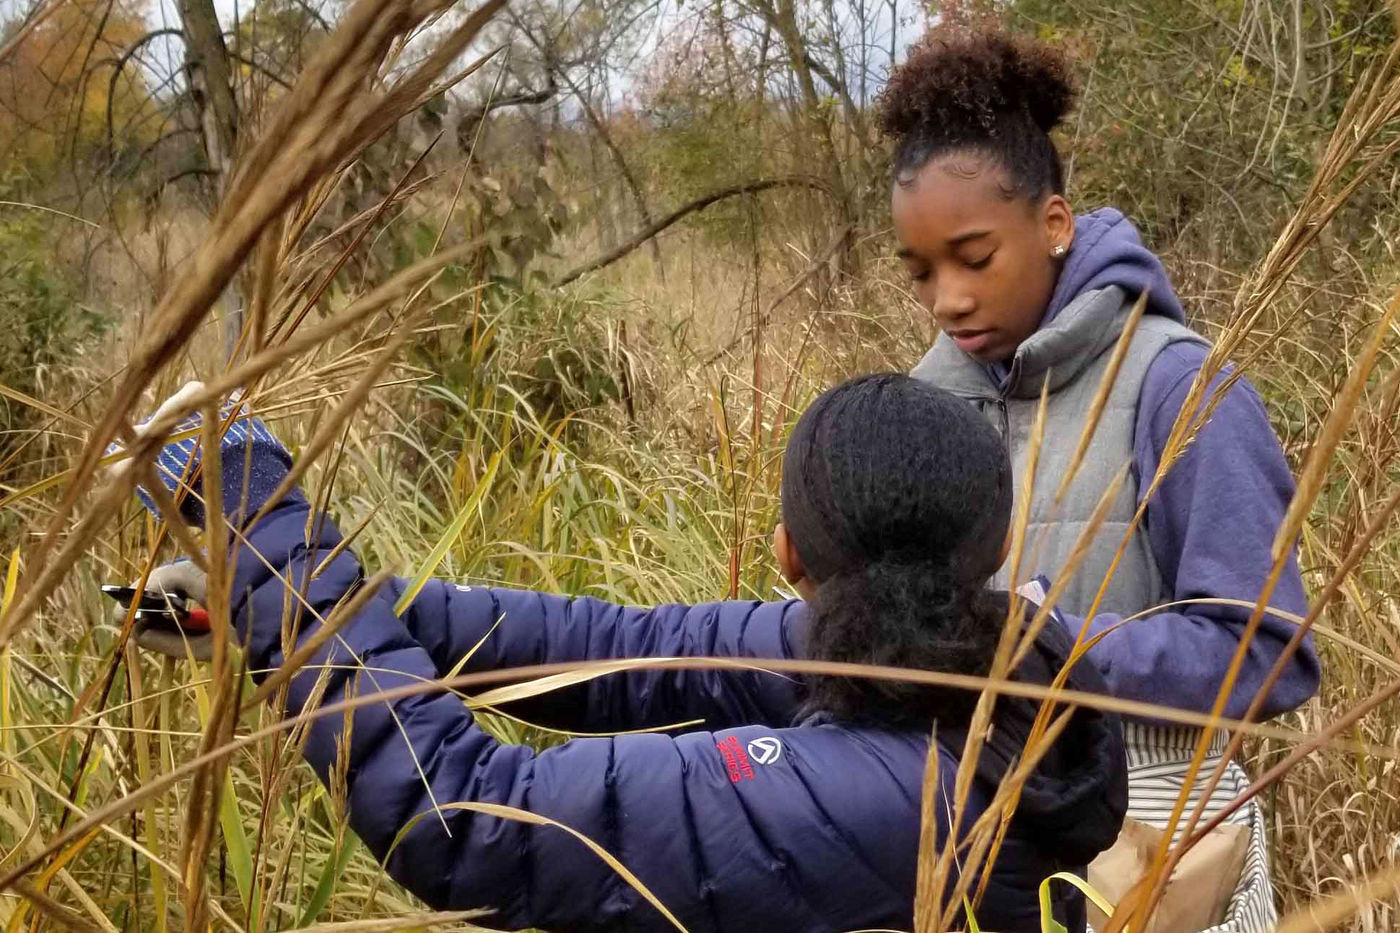 High school students join in seed collecting at Beaubien Woods Forest Preserve.